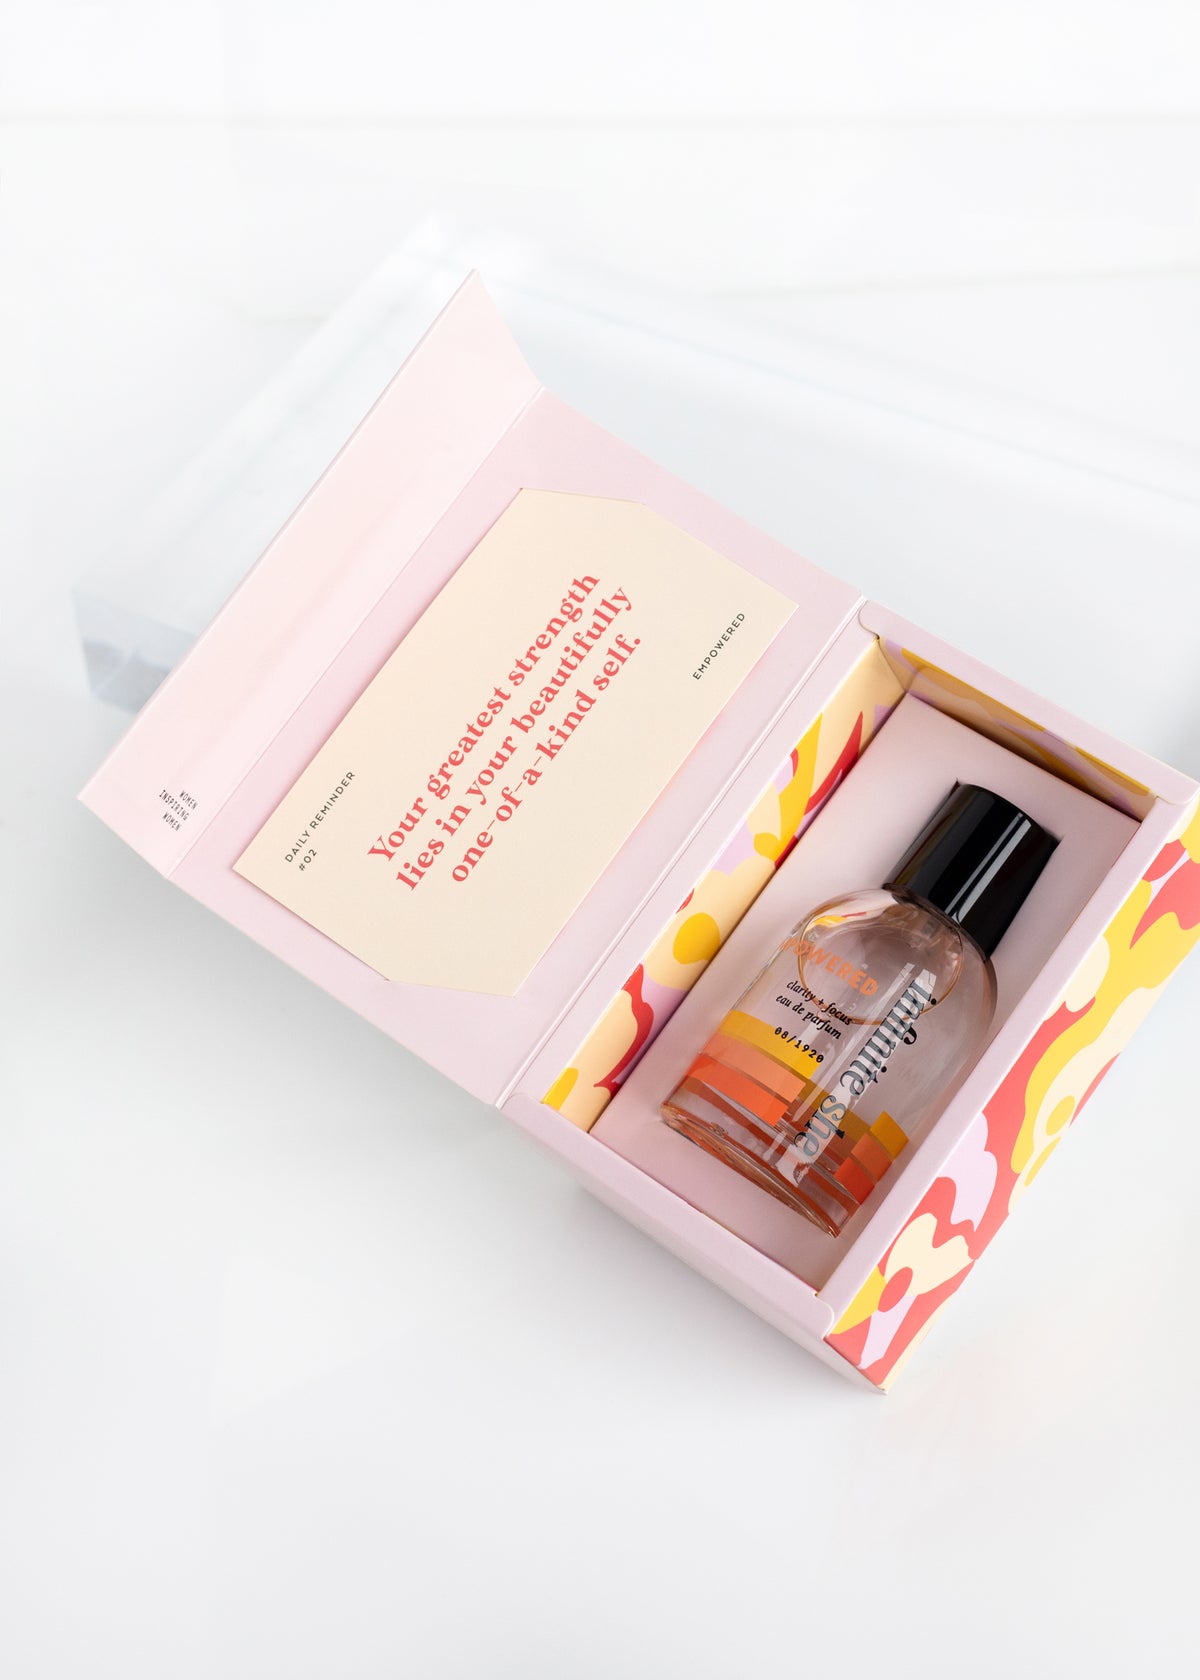 A Margot Elena Infinite She Empowered Eau de Parfum in a colorful box with a motivational quote on the inside lid, placed on a white surface.